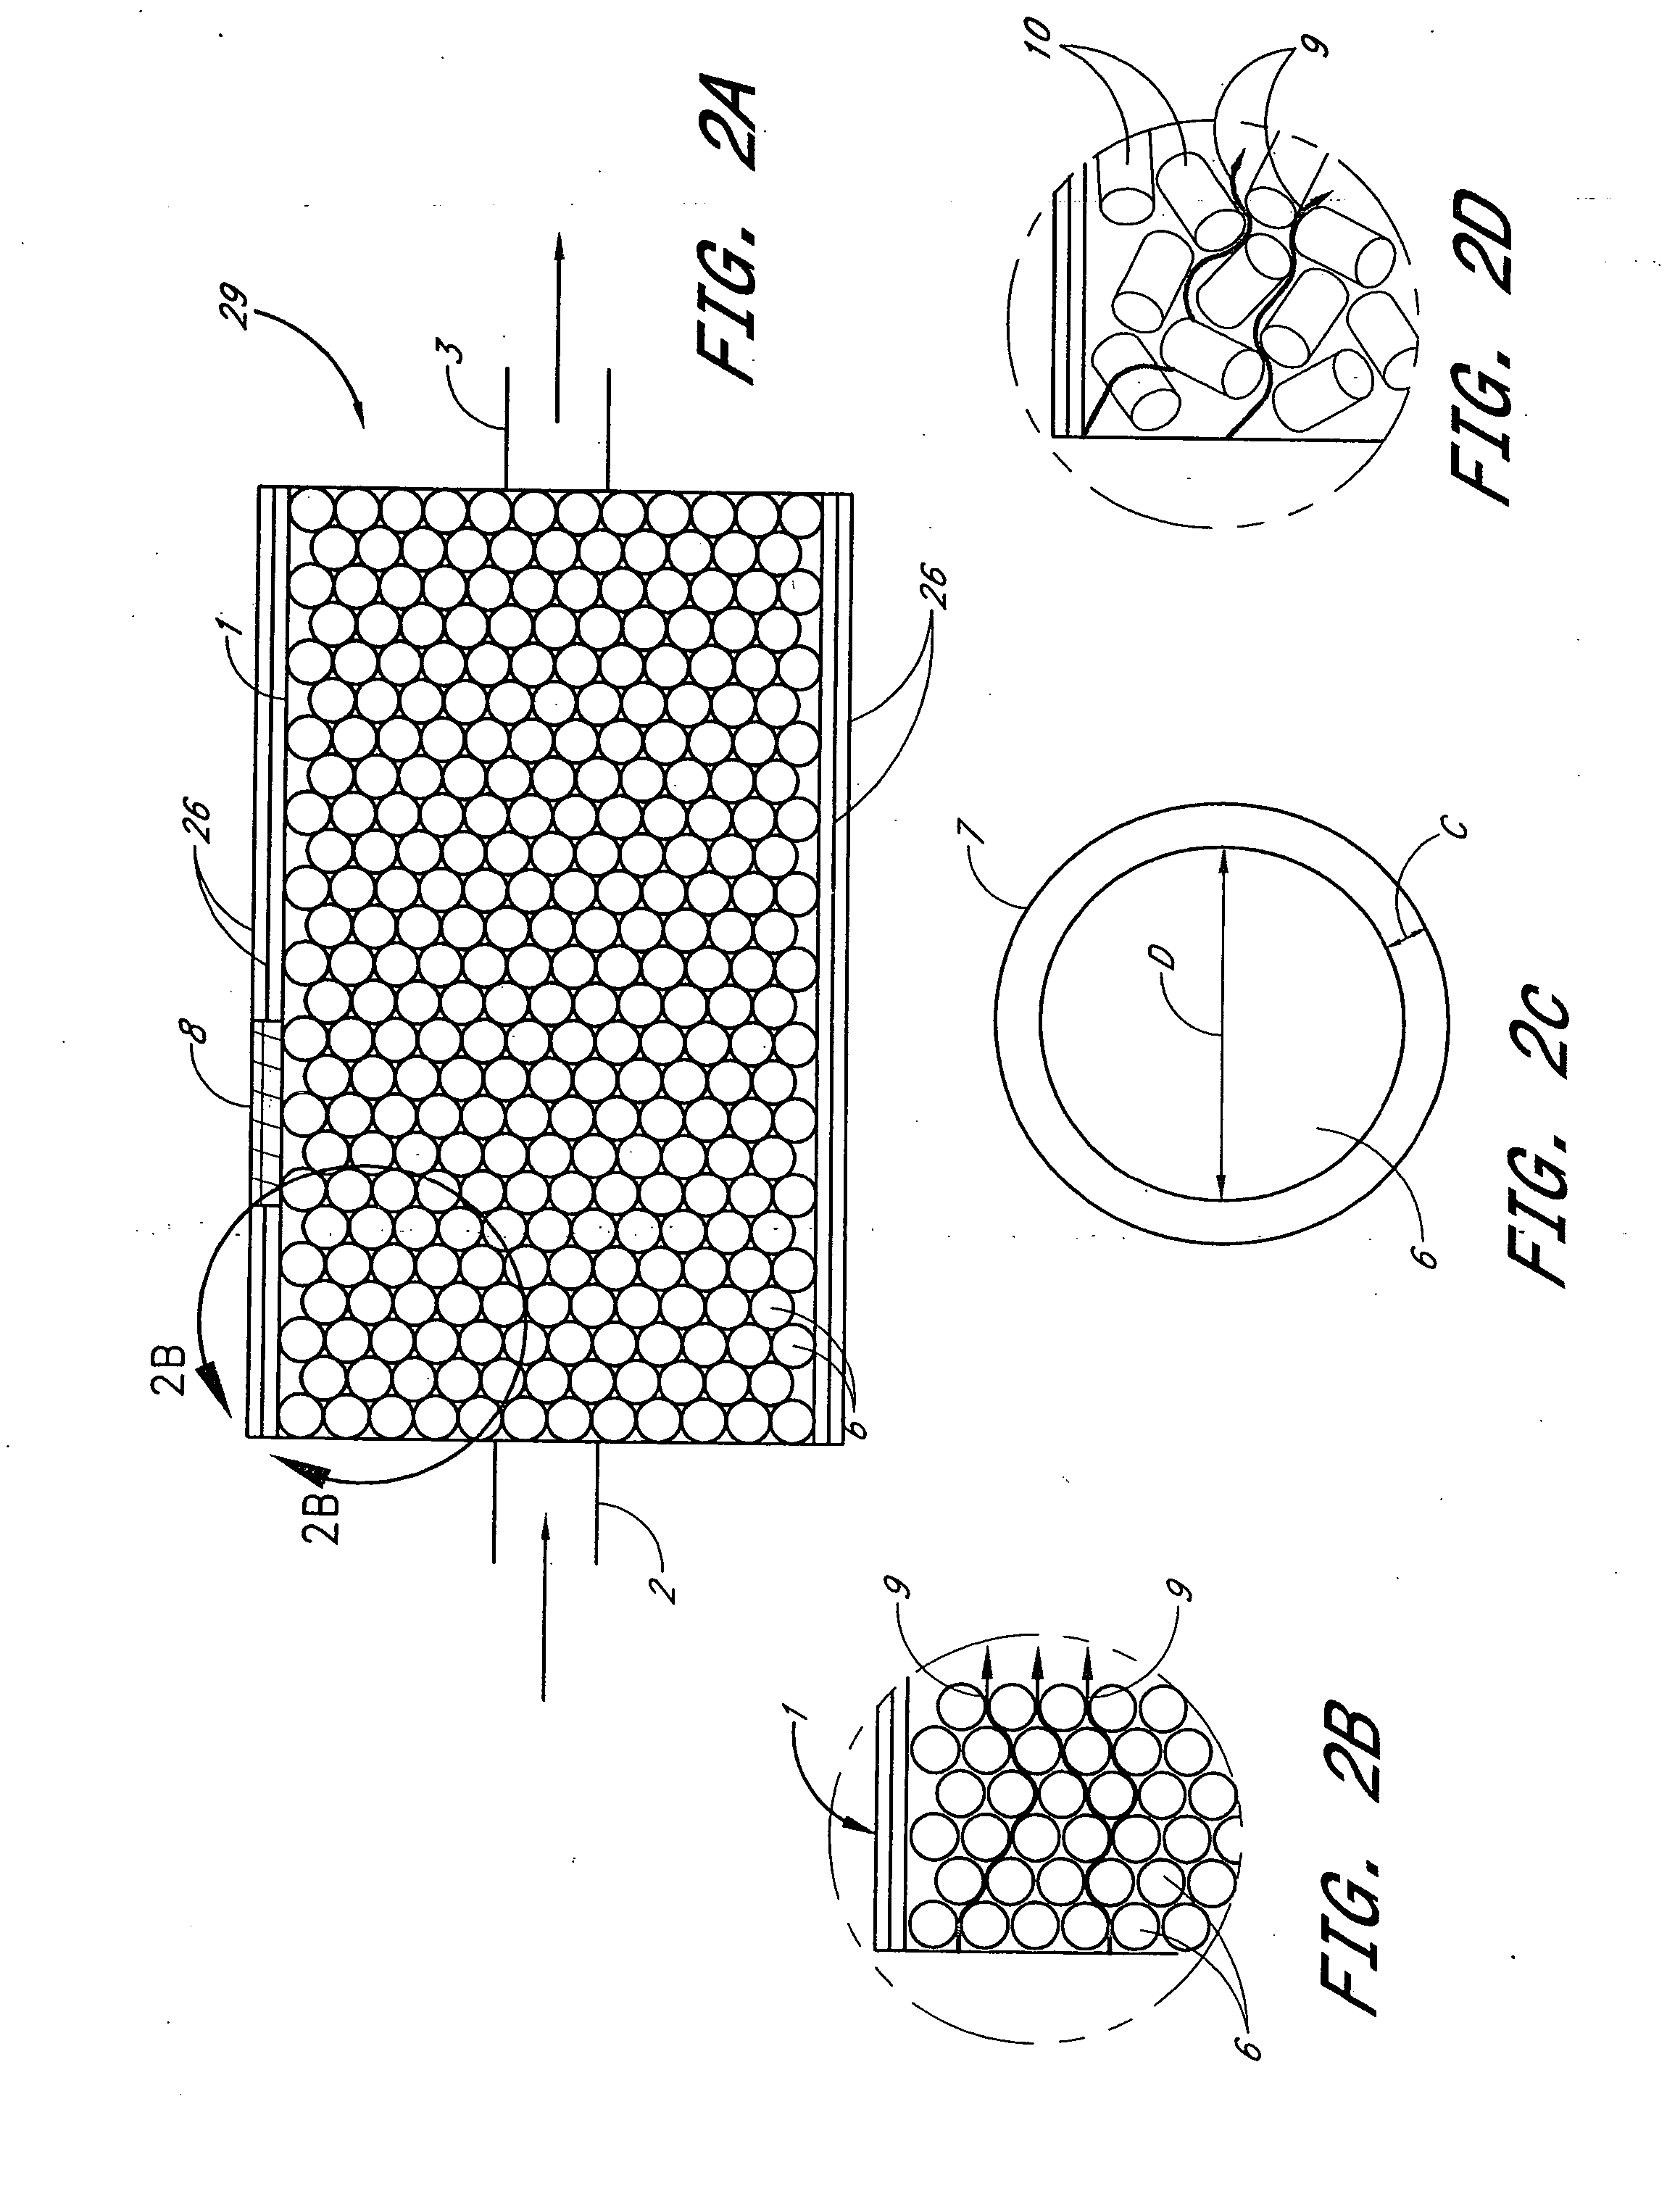 Sublimation bed employing carrier gas guidance structures